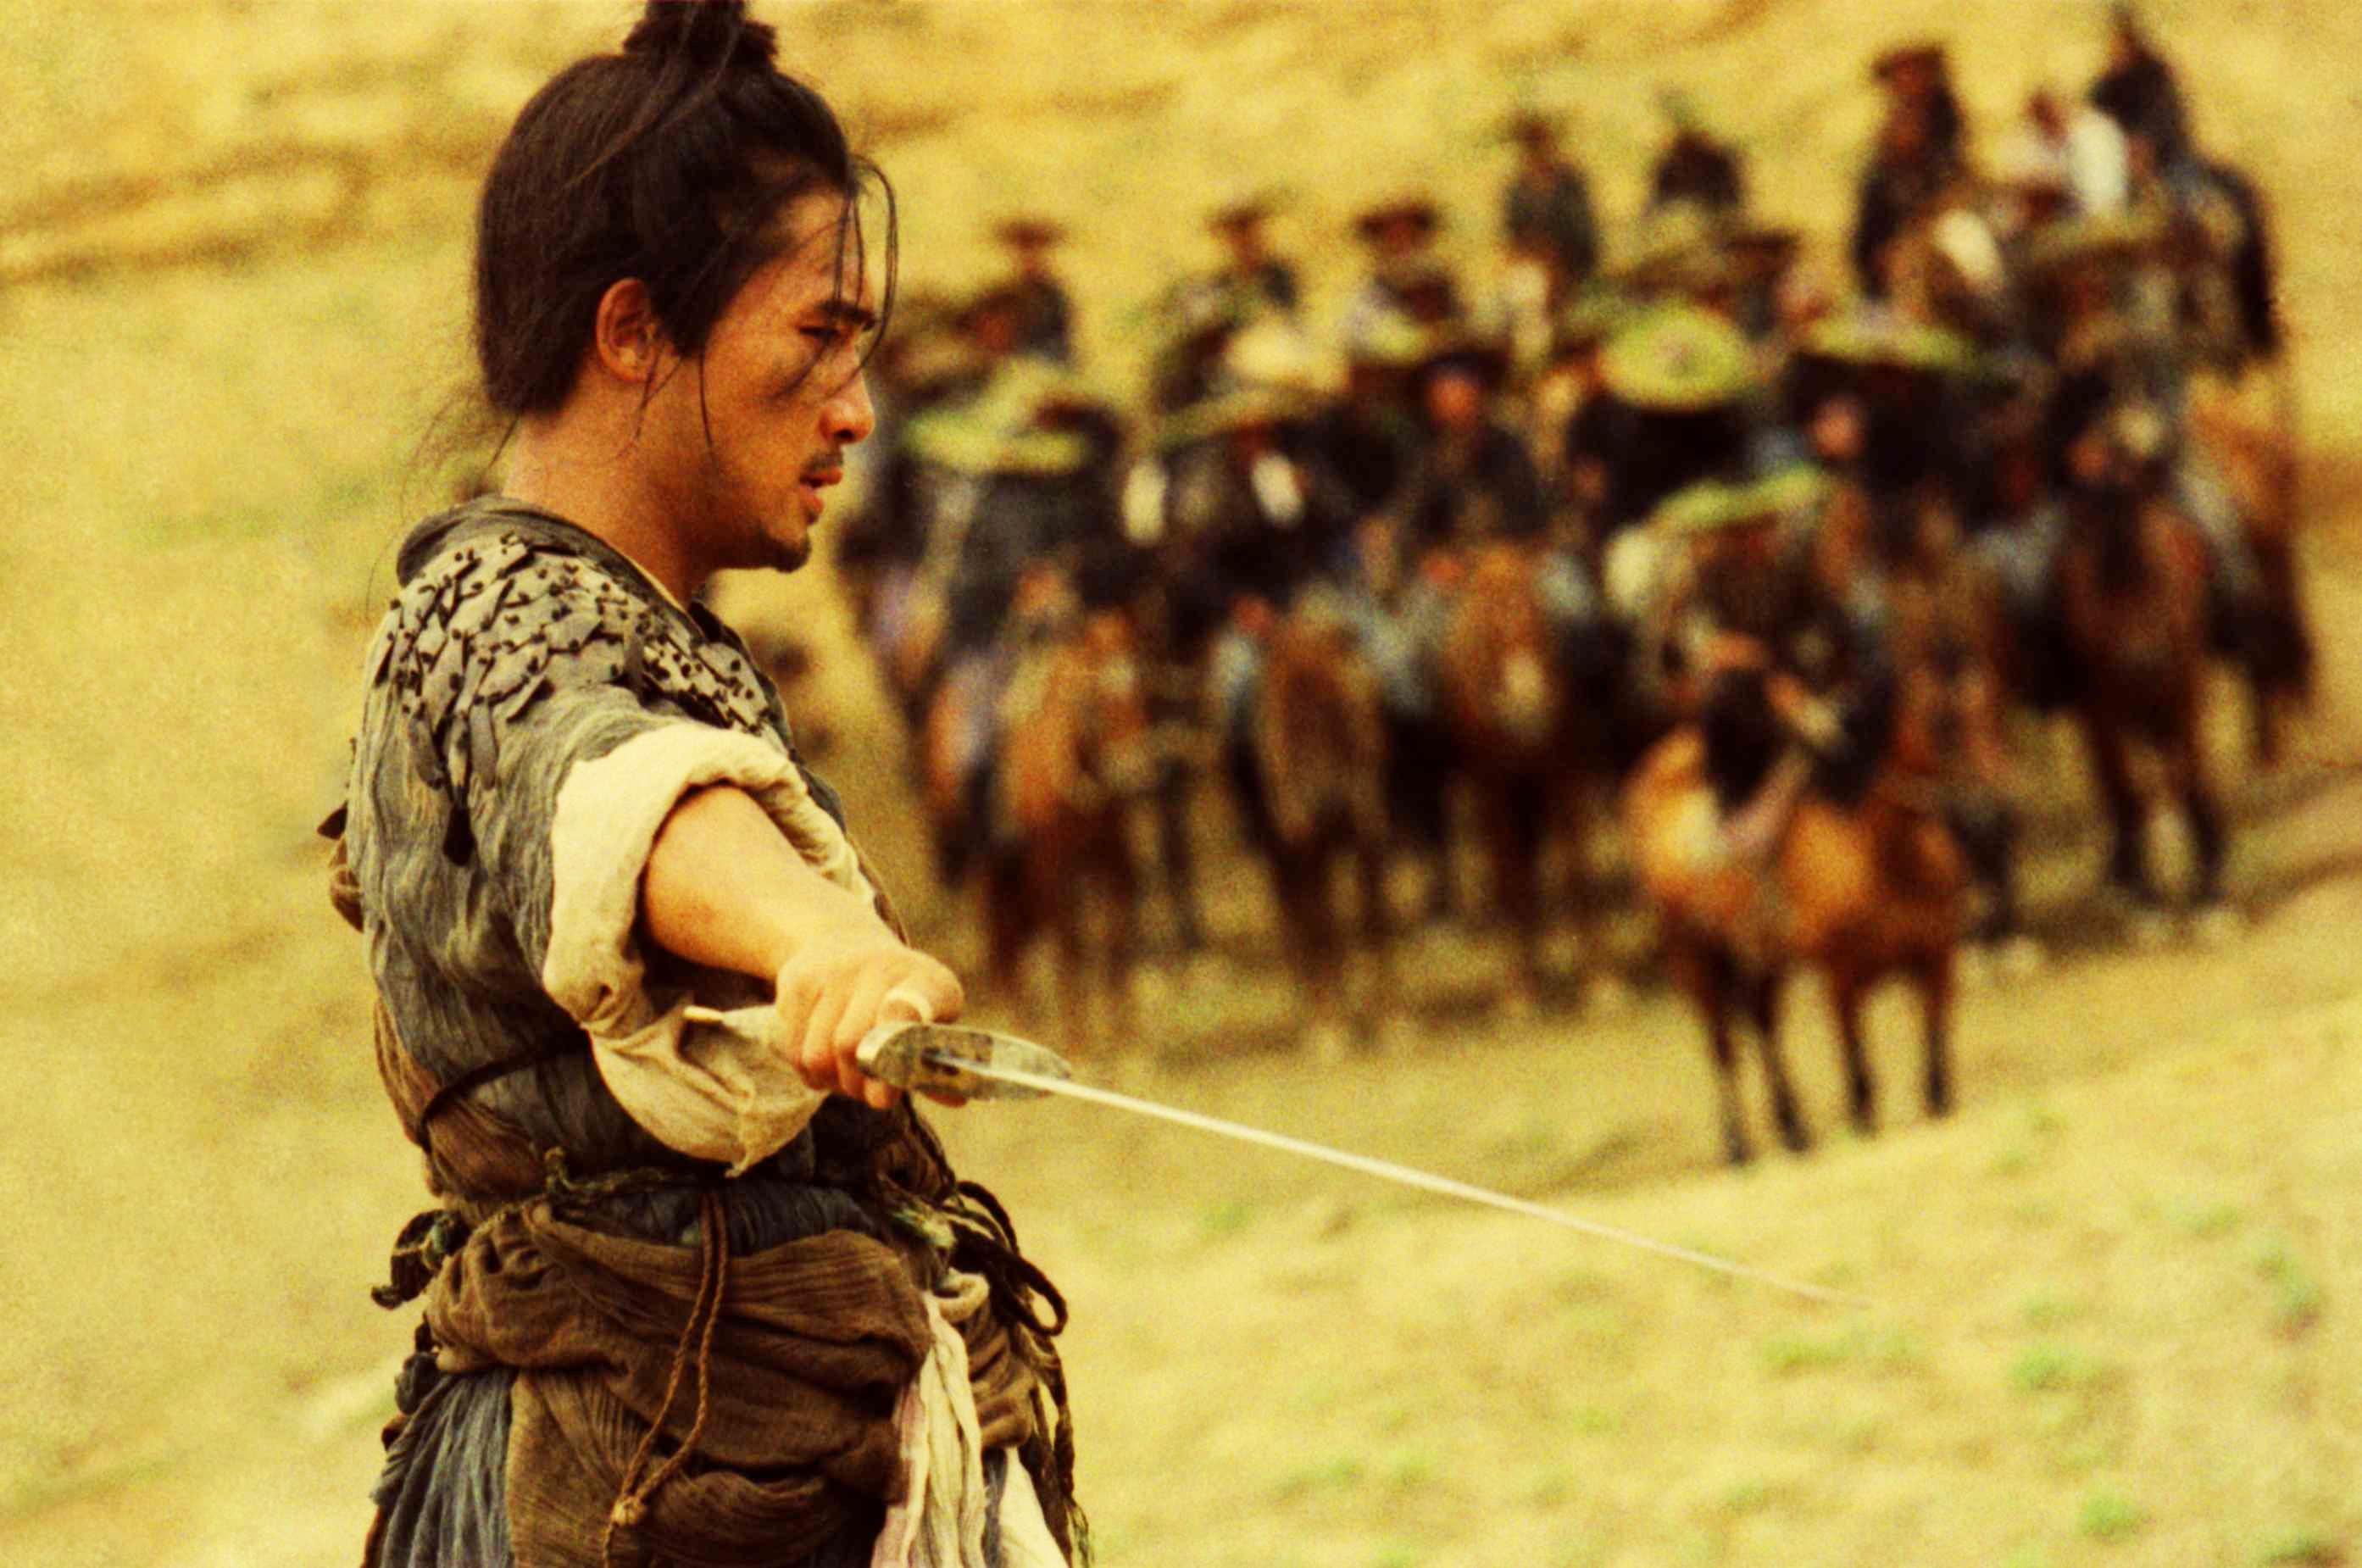 Tony Leung Chiu Wai stars as Blind Swordsman in Sony Pictures Classics' Ashes of Time Redux (2008)